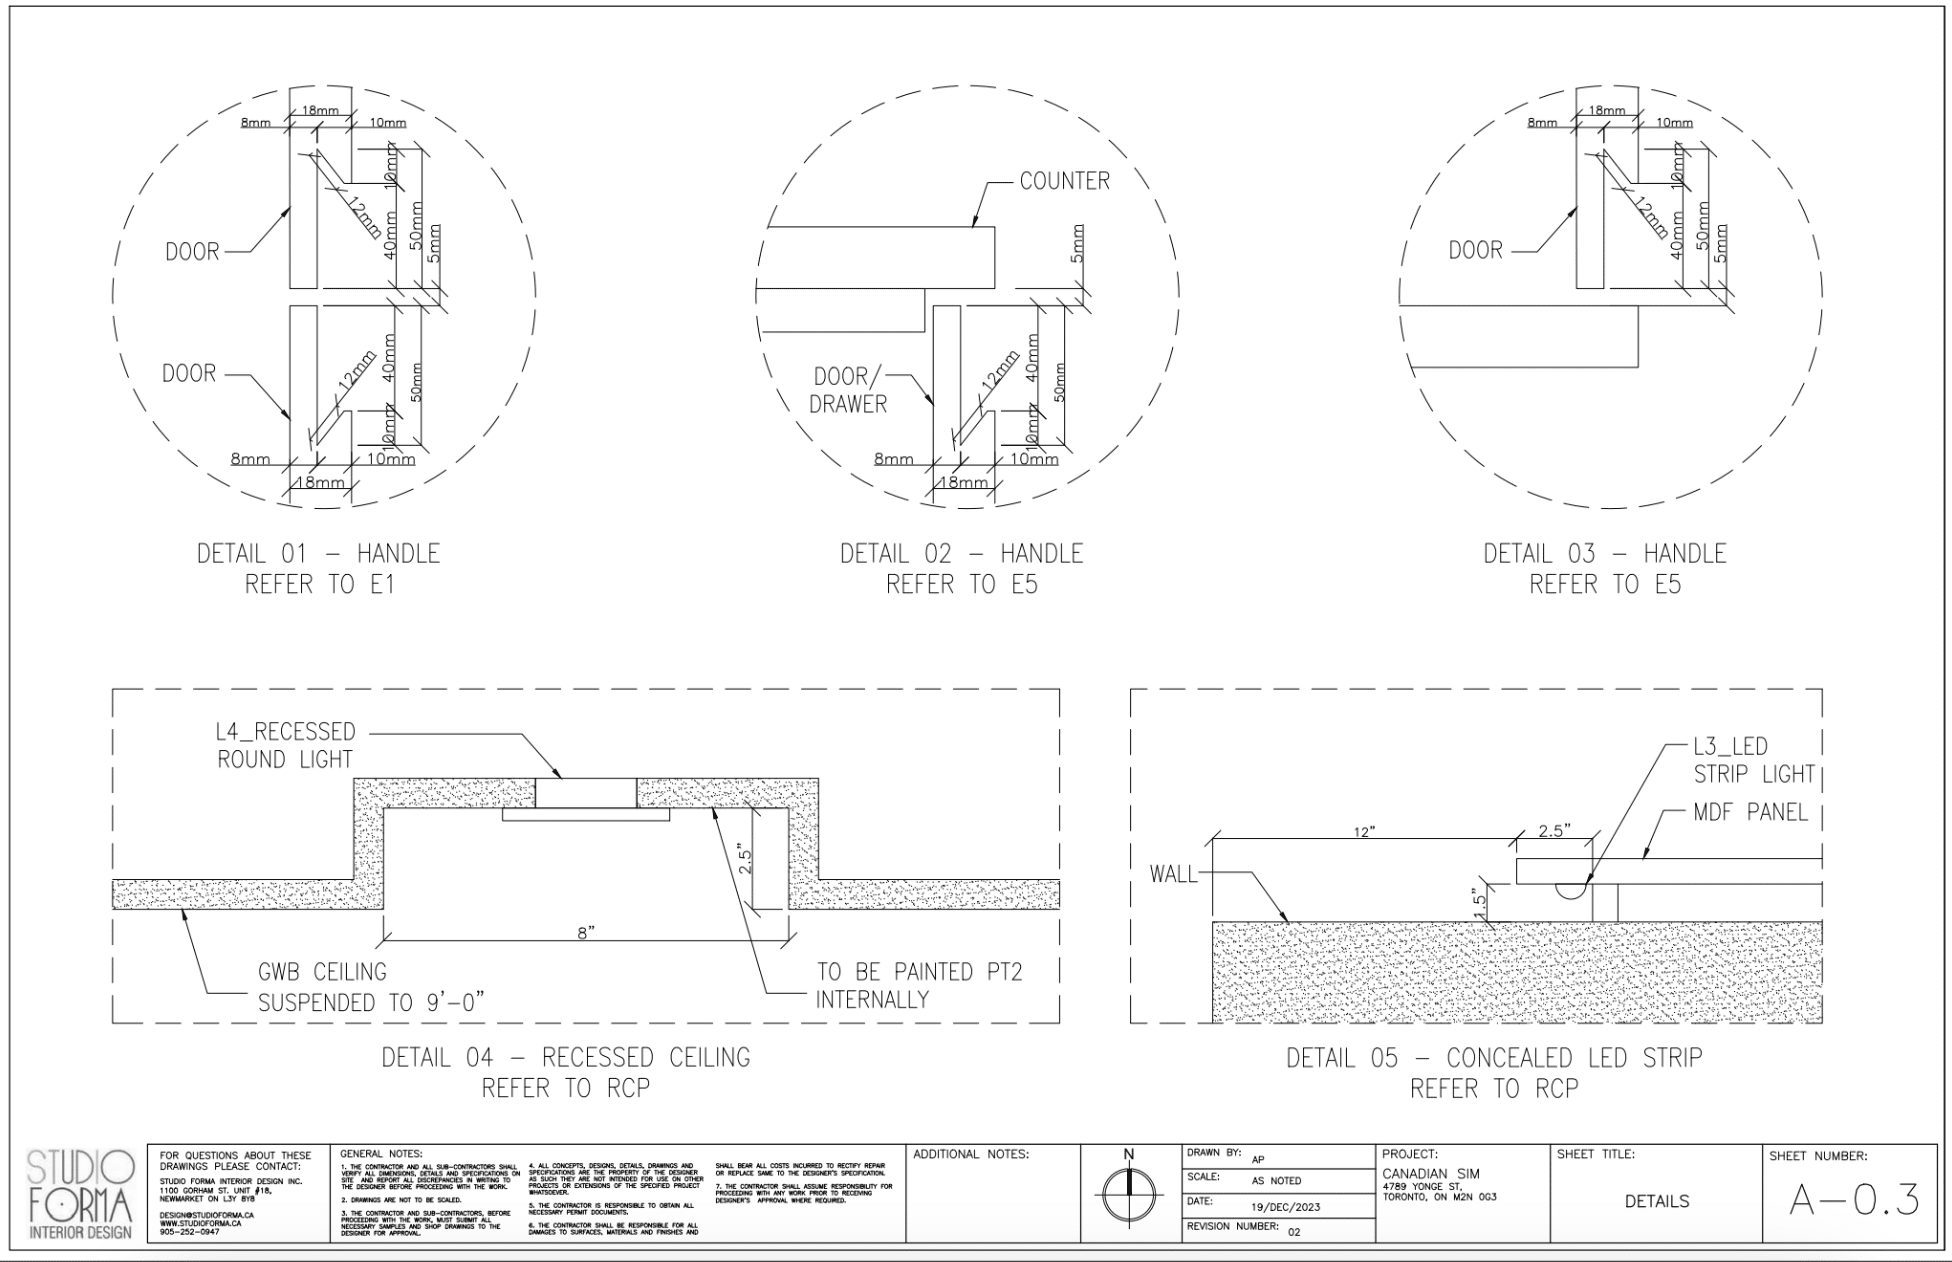 Construction Drawings for an office build-out